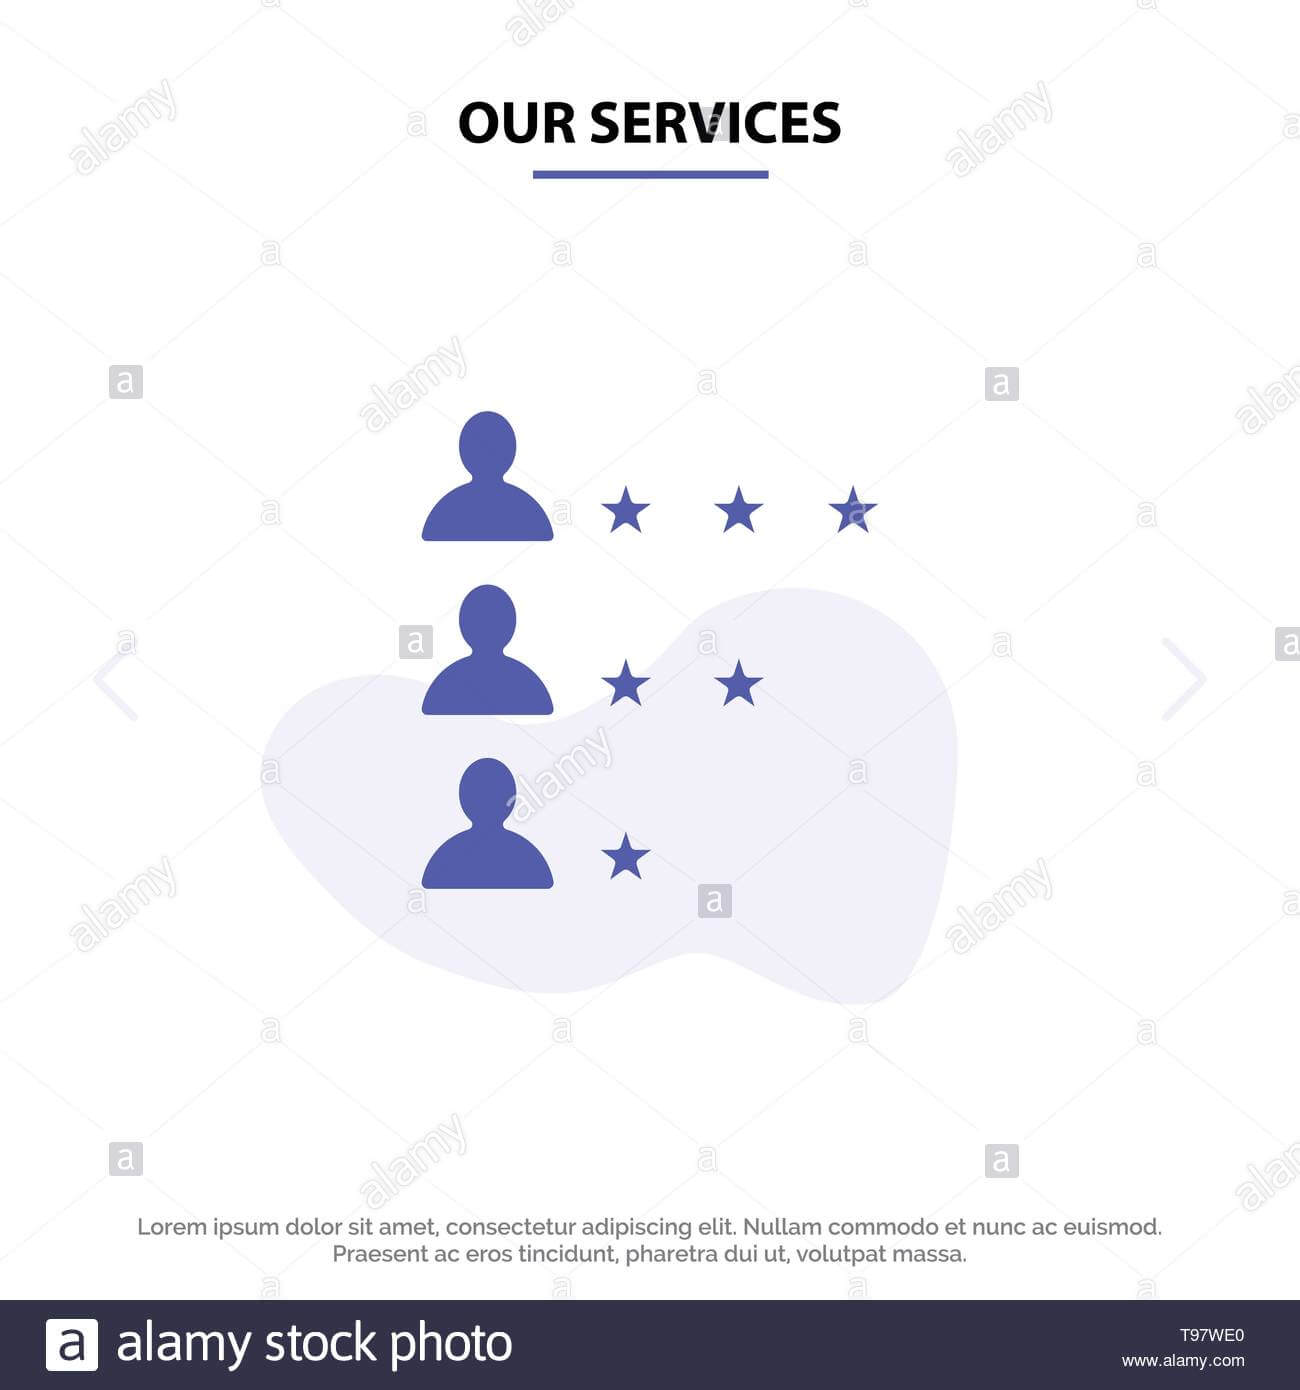 Our Services Business, Job, Find, Network Solid Glyph Icon With Service Job Card Template